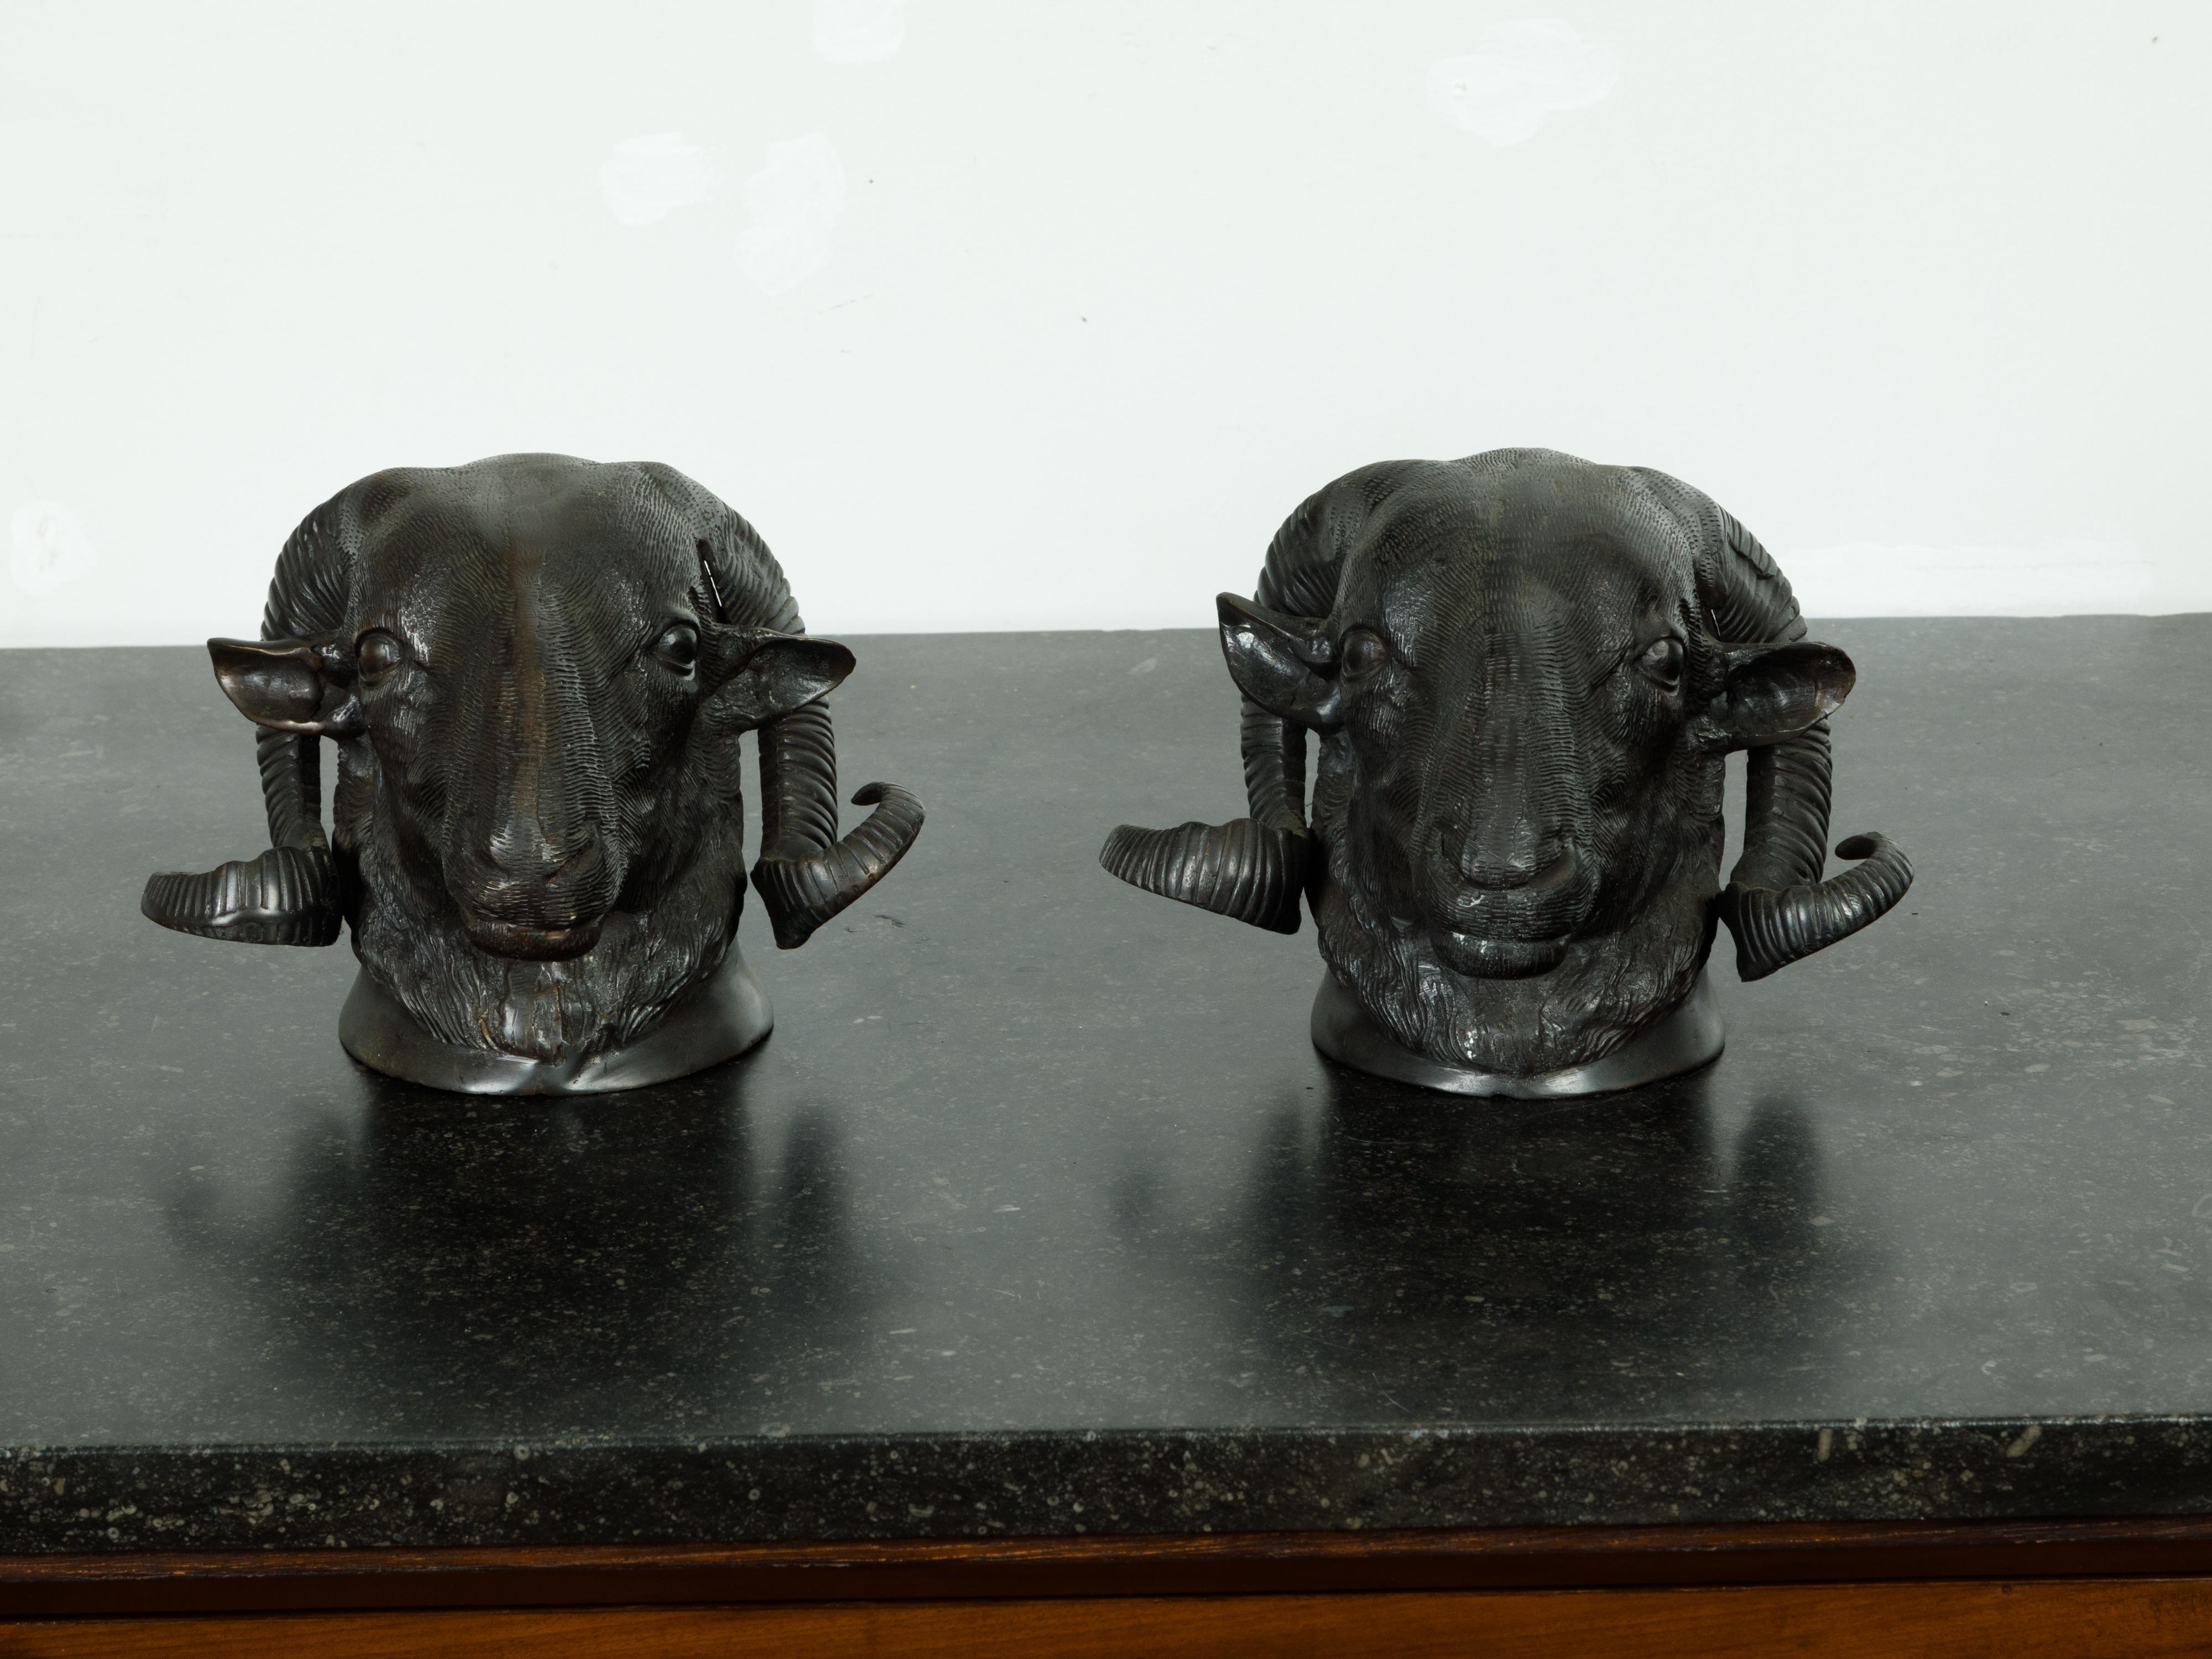 A pair of French bronze rams' heads from the mid 20th century, with dark patina. We currently have two pairs available, priced and sold $2,250 each pair. Created in France during the midcentury period, each of this pair of bronze sculptures features